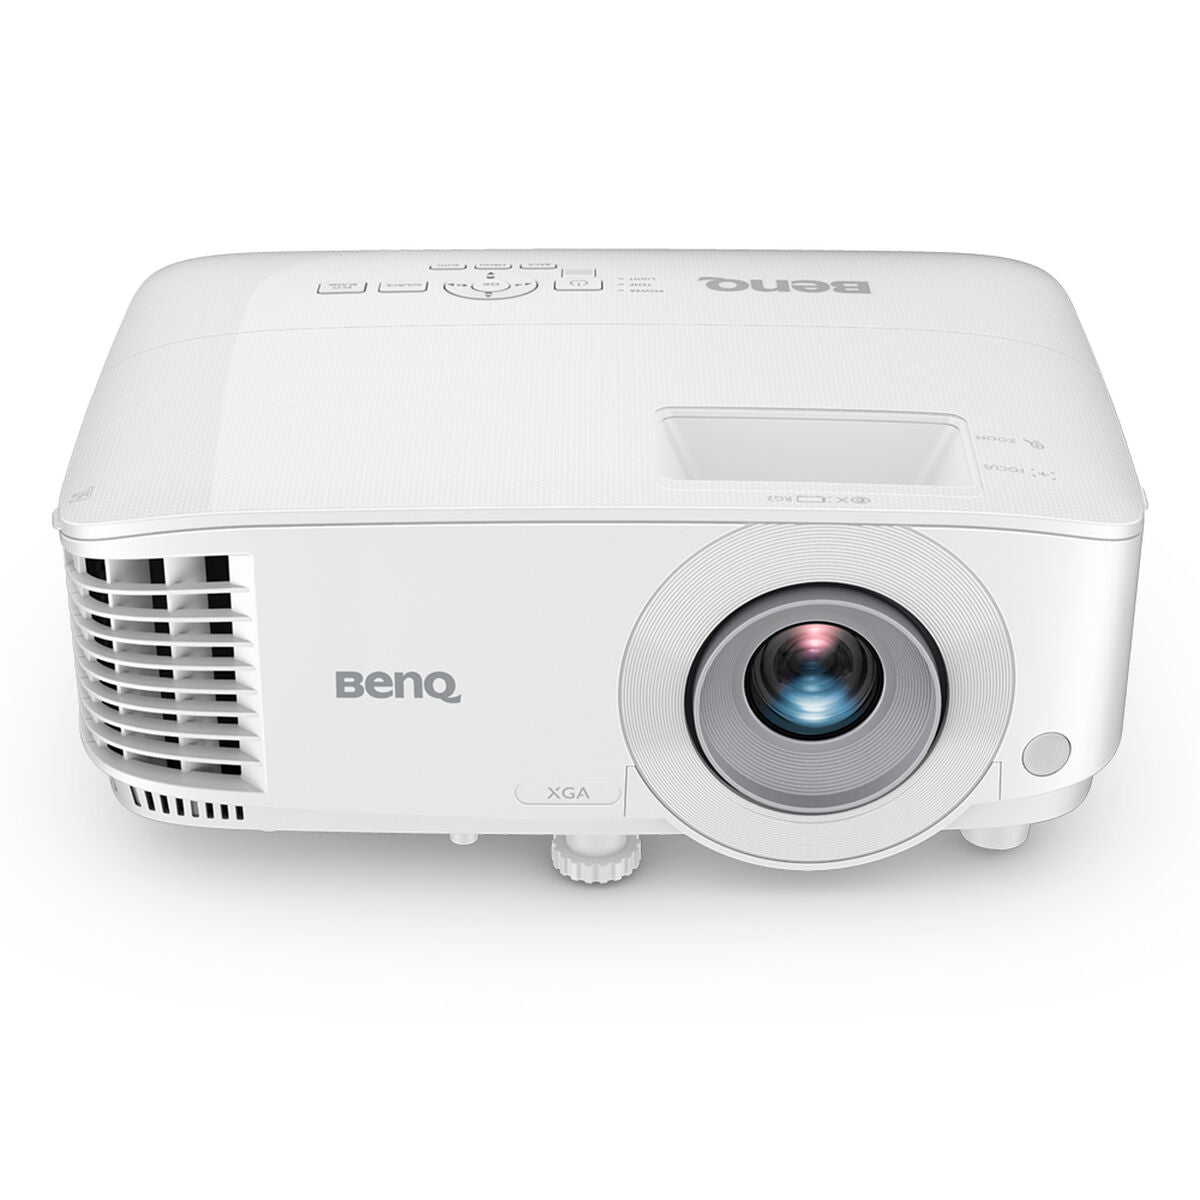 Projector BenQ 9H.JNE77.1HE 4000 Lm, BenQ, Electronics, Photography and video cameras, projector-benq-9h-jne77-1he-4000-lm, Brand_BenQ, category-reference-2609, category-reference-2642, category-reference-2947, category-reference-t-19653, category-reference-t-8122, computers / peripherals, Condition_NEW, entertainment, fotografía, office, Price_500 - 600, RiotNook